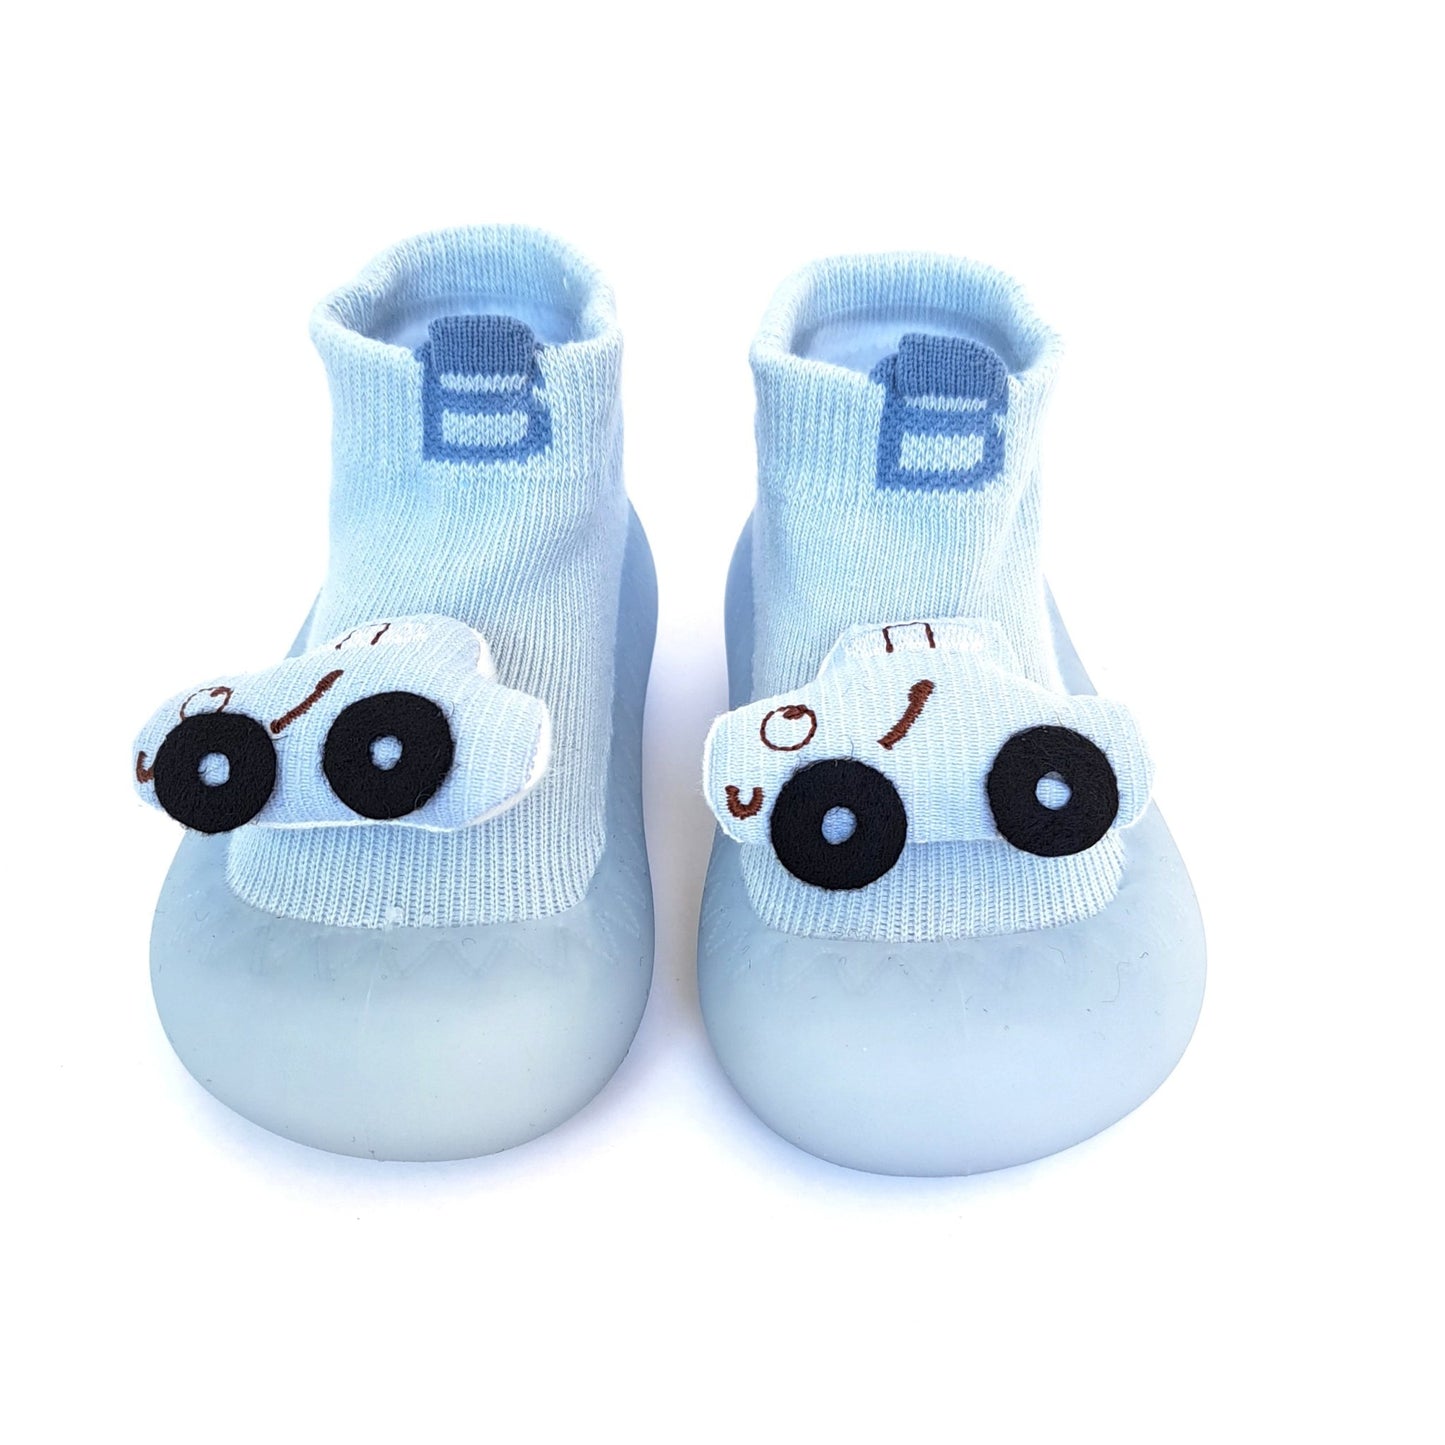 Zoomies by Bearba-Sock Shoes for Babies & Toddlers Sizes-XS,S,M,L-Flexible Soles, Lightweight, Machine Washable-Blue - Bearba